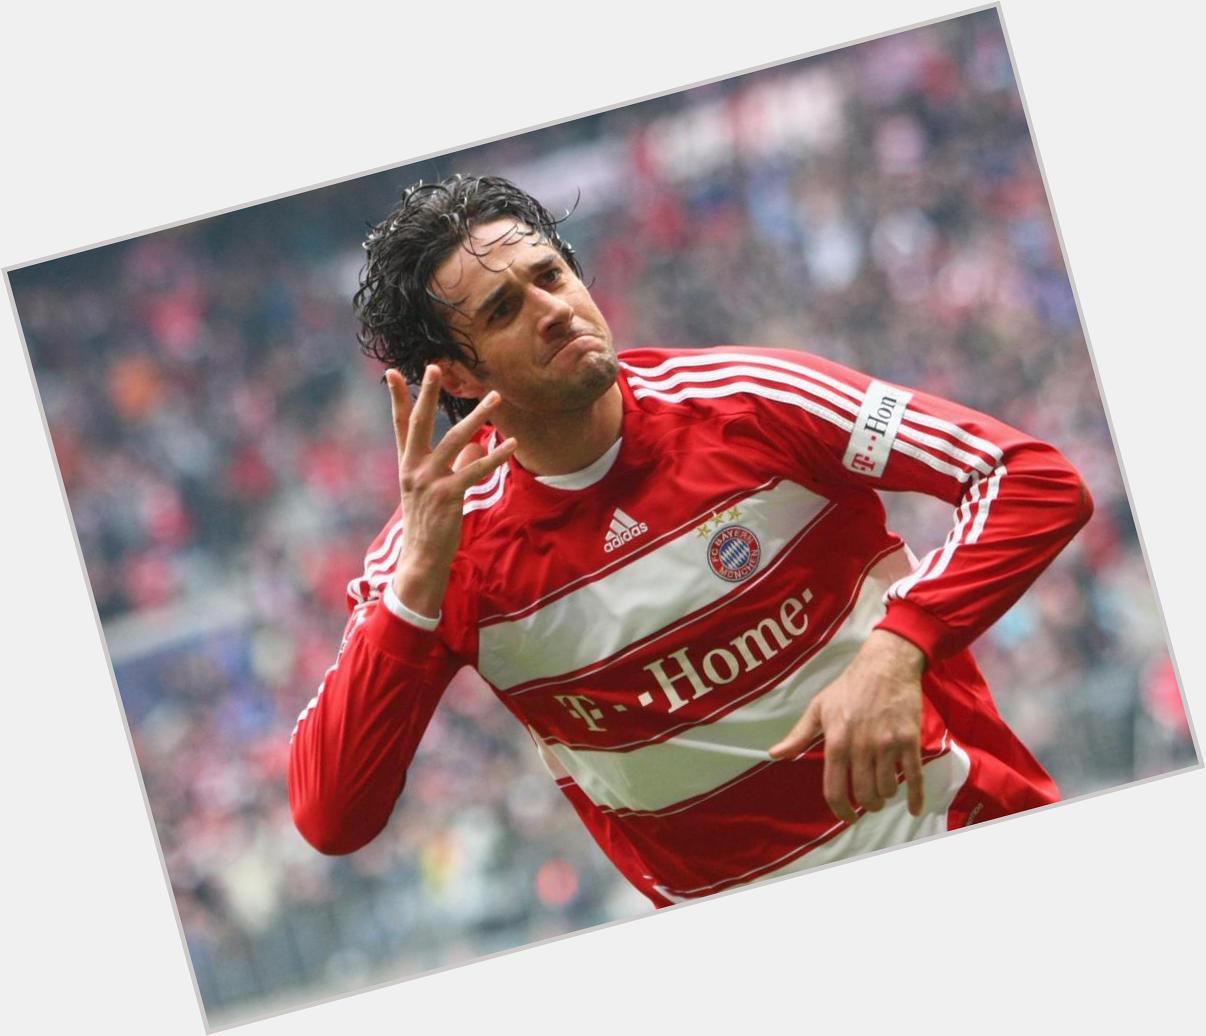 Happy 38th birthday to the former striker Luca Toni ! 